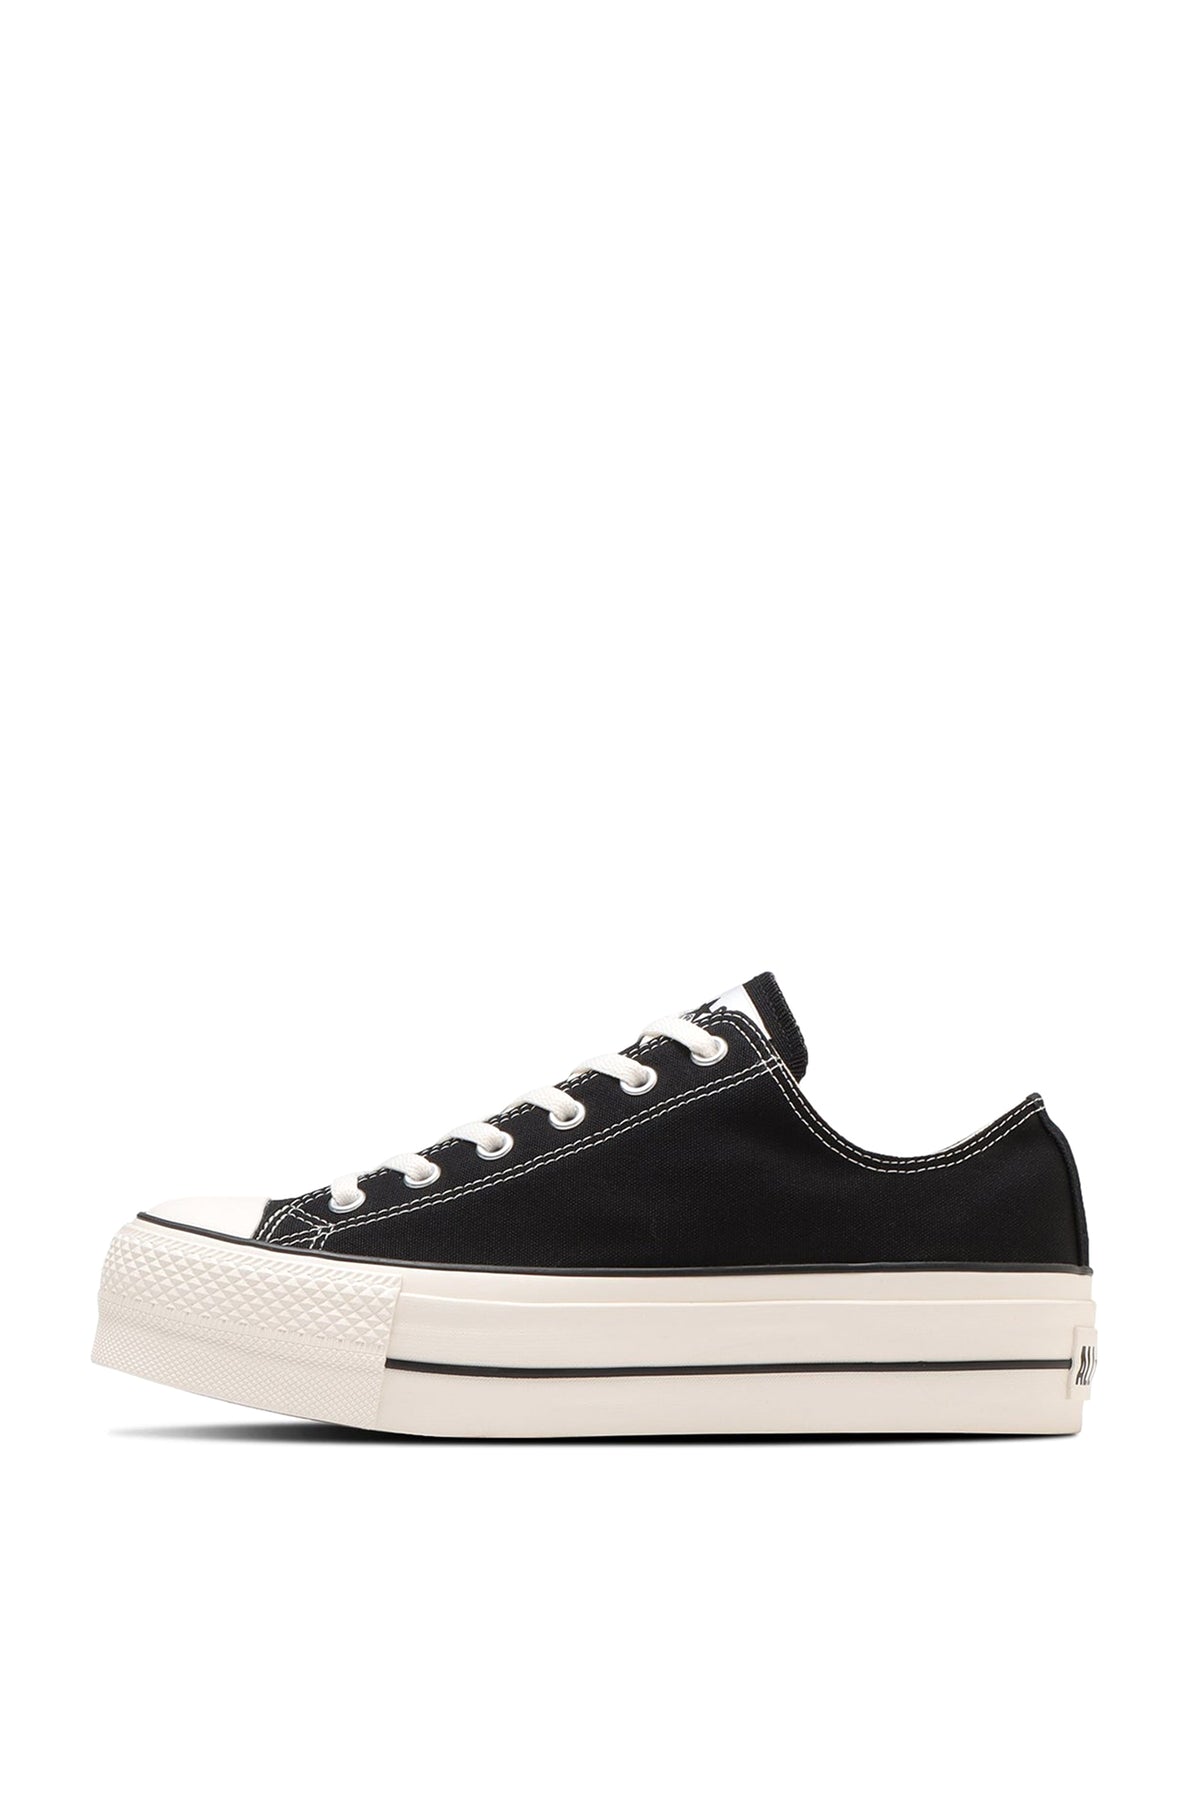 ALL STAR _ LIFTED OX / BLK